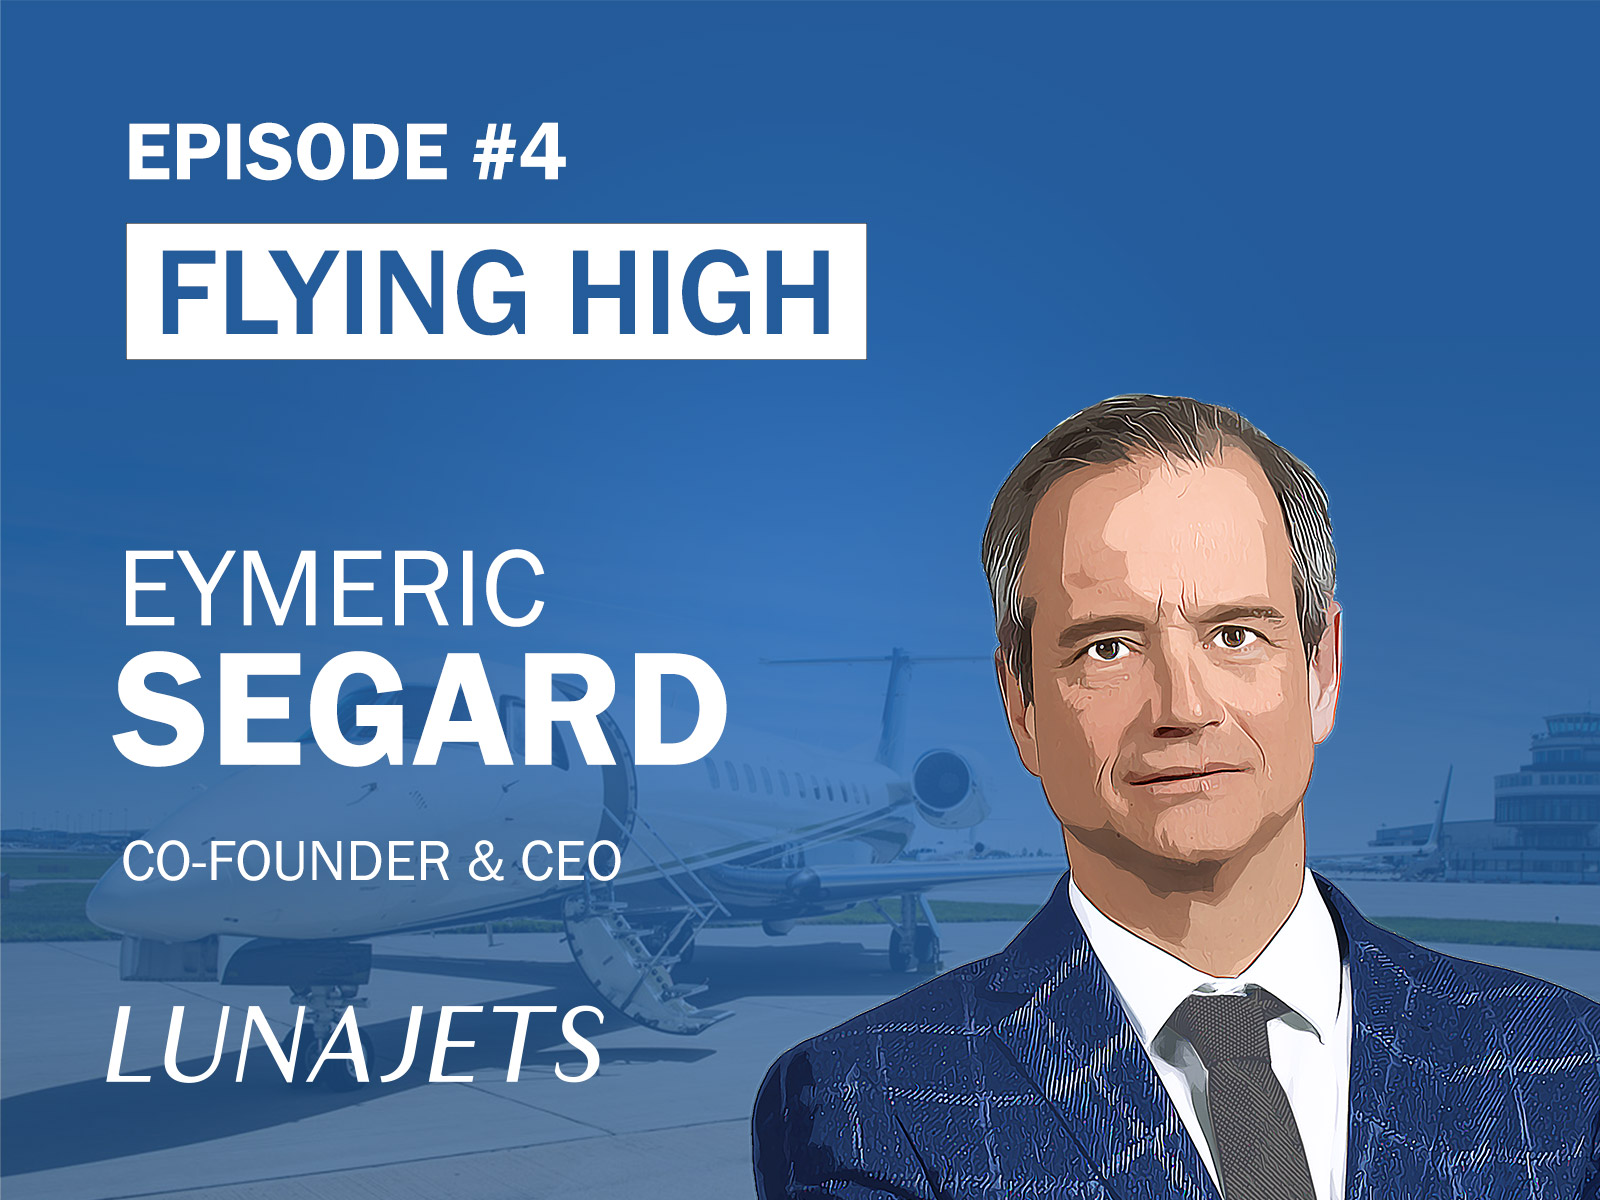 Today on Global Value Creators, we are delighted to welcome our friend Eymeric Segard, Co-Founder and CEO of LunaJets, one of the largest private jet operators in Europe. After forgoing a successful advertising career in favor of uncharted entrepreneurship in the skies, Eymeric dedicated his life to building a modern aviation platform, the first component of which is a NetJets-like service, but with more flexibility at a lower price. In an industry where many competitors have fallen, Eymeric and LunaJets continue to Fly High. We hope you enjoy.